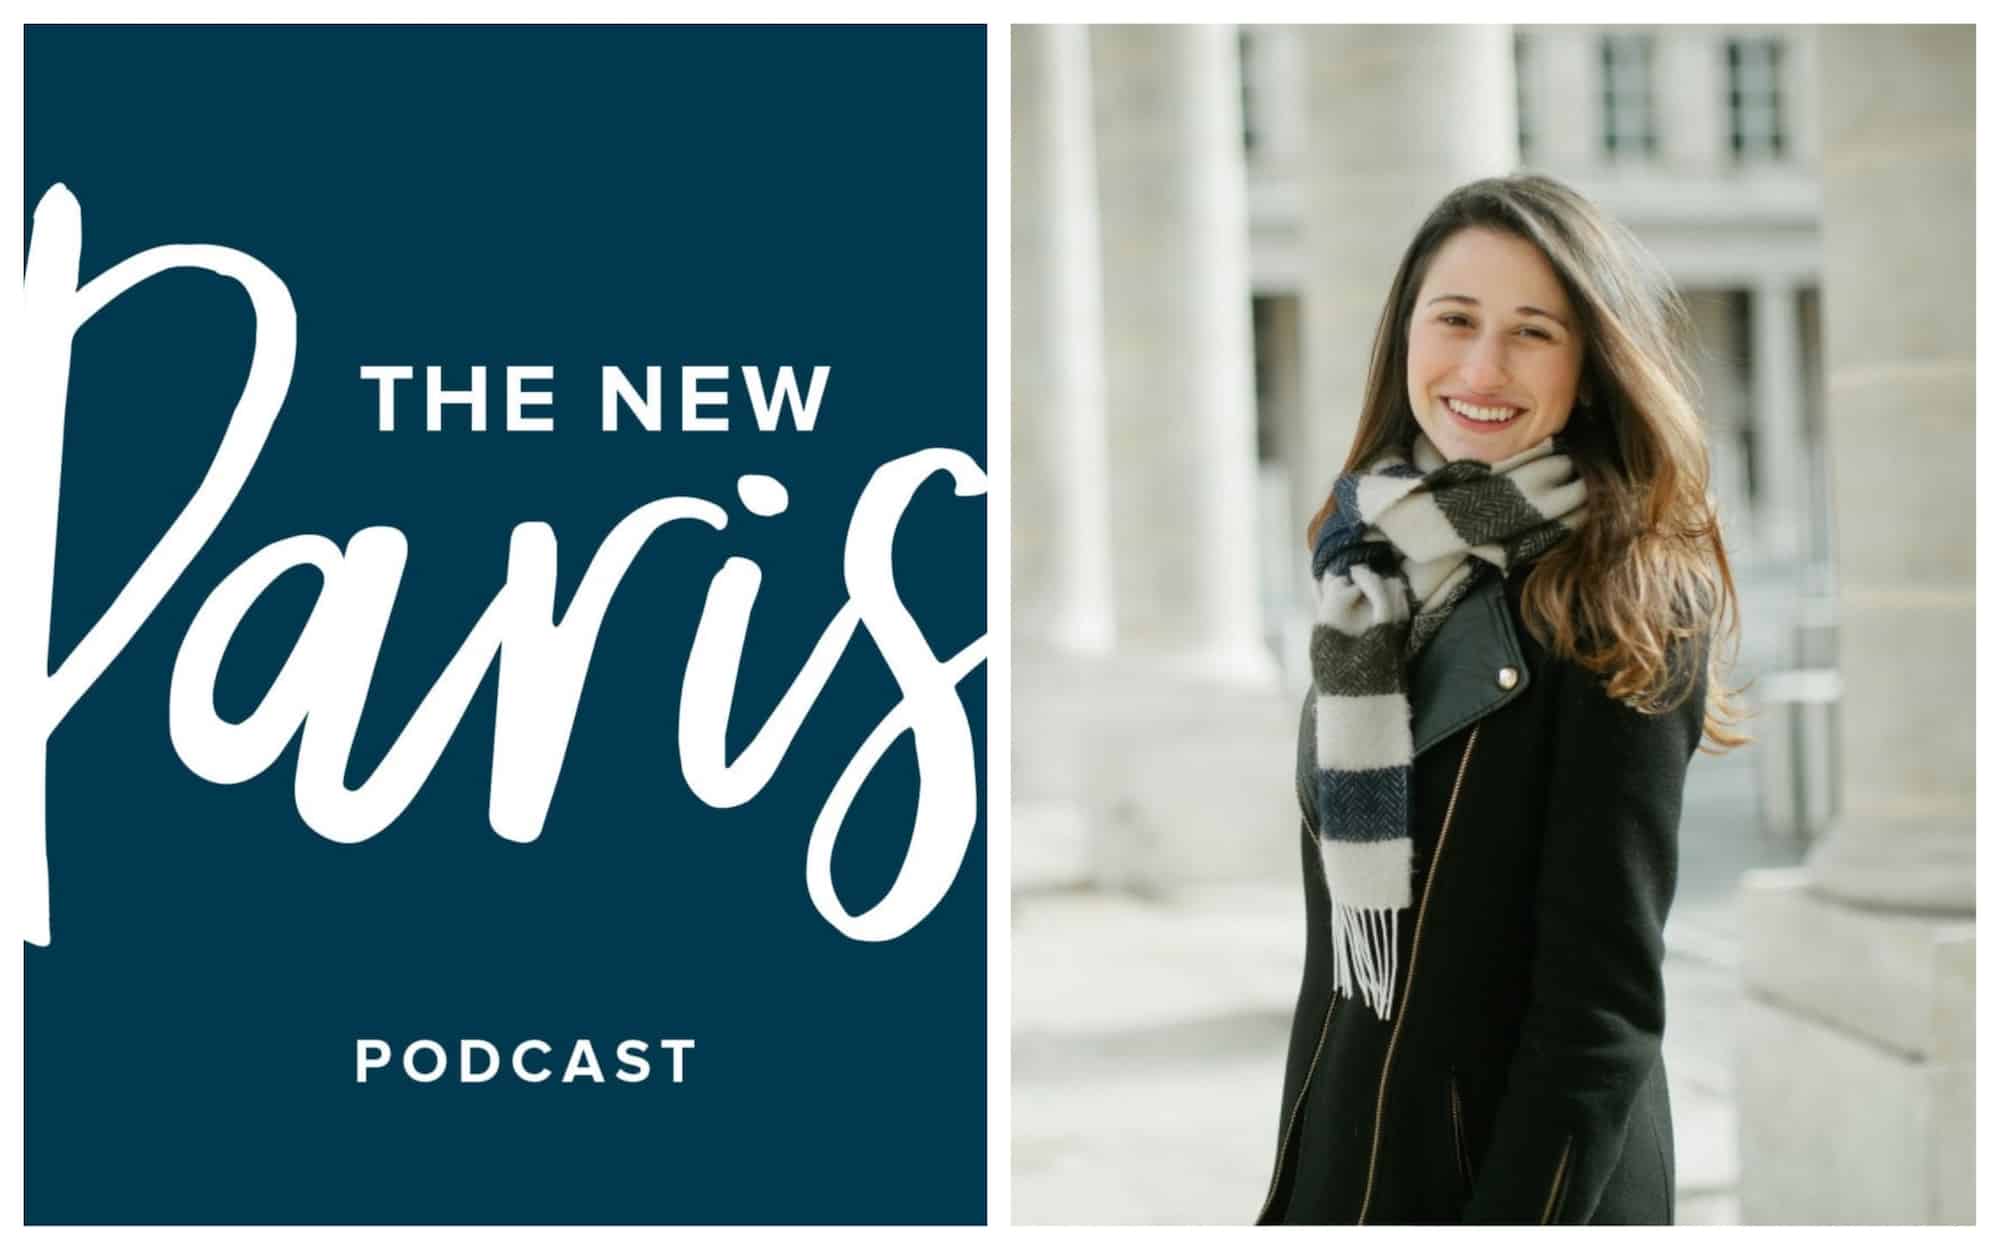 HiP Paris Blog rounds up the best Paris podcasts like Lindsey Tramuta's 'The New Paris' show about life and trends in Paris. A poster for her show (left) and a portrait of Lindsey smiling at the camera at the Jardins du Palais Royal (right).